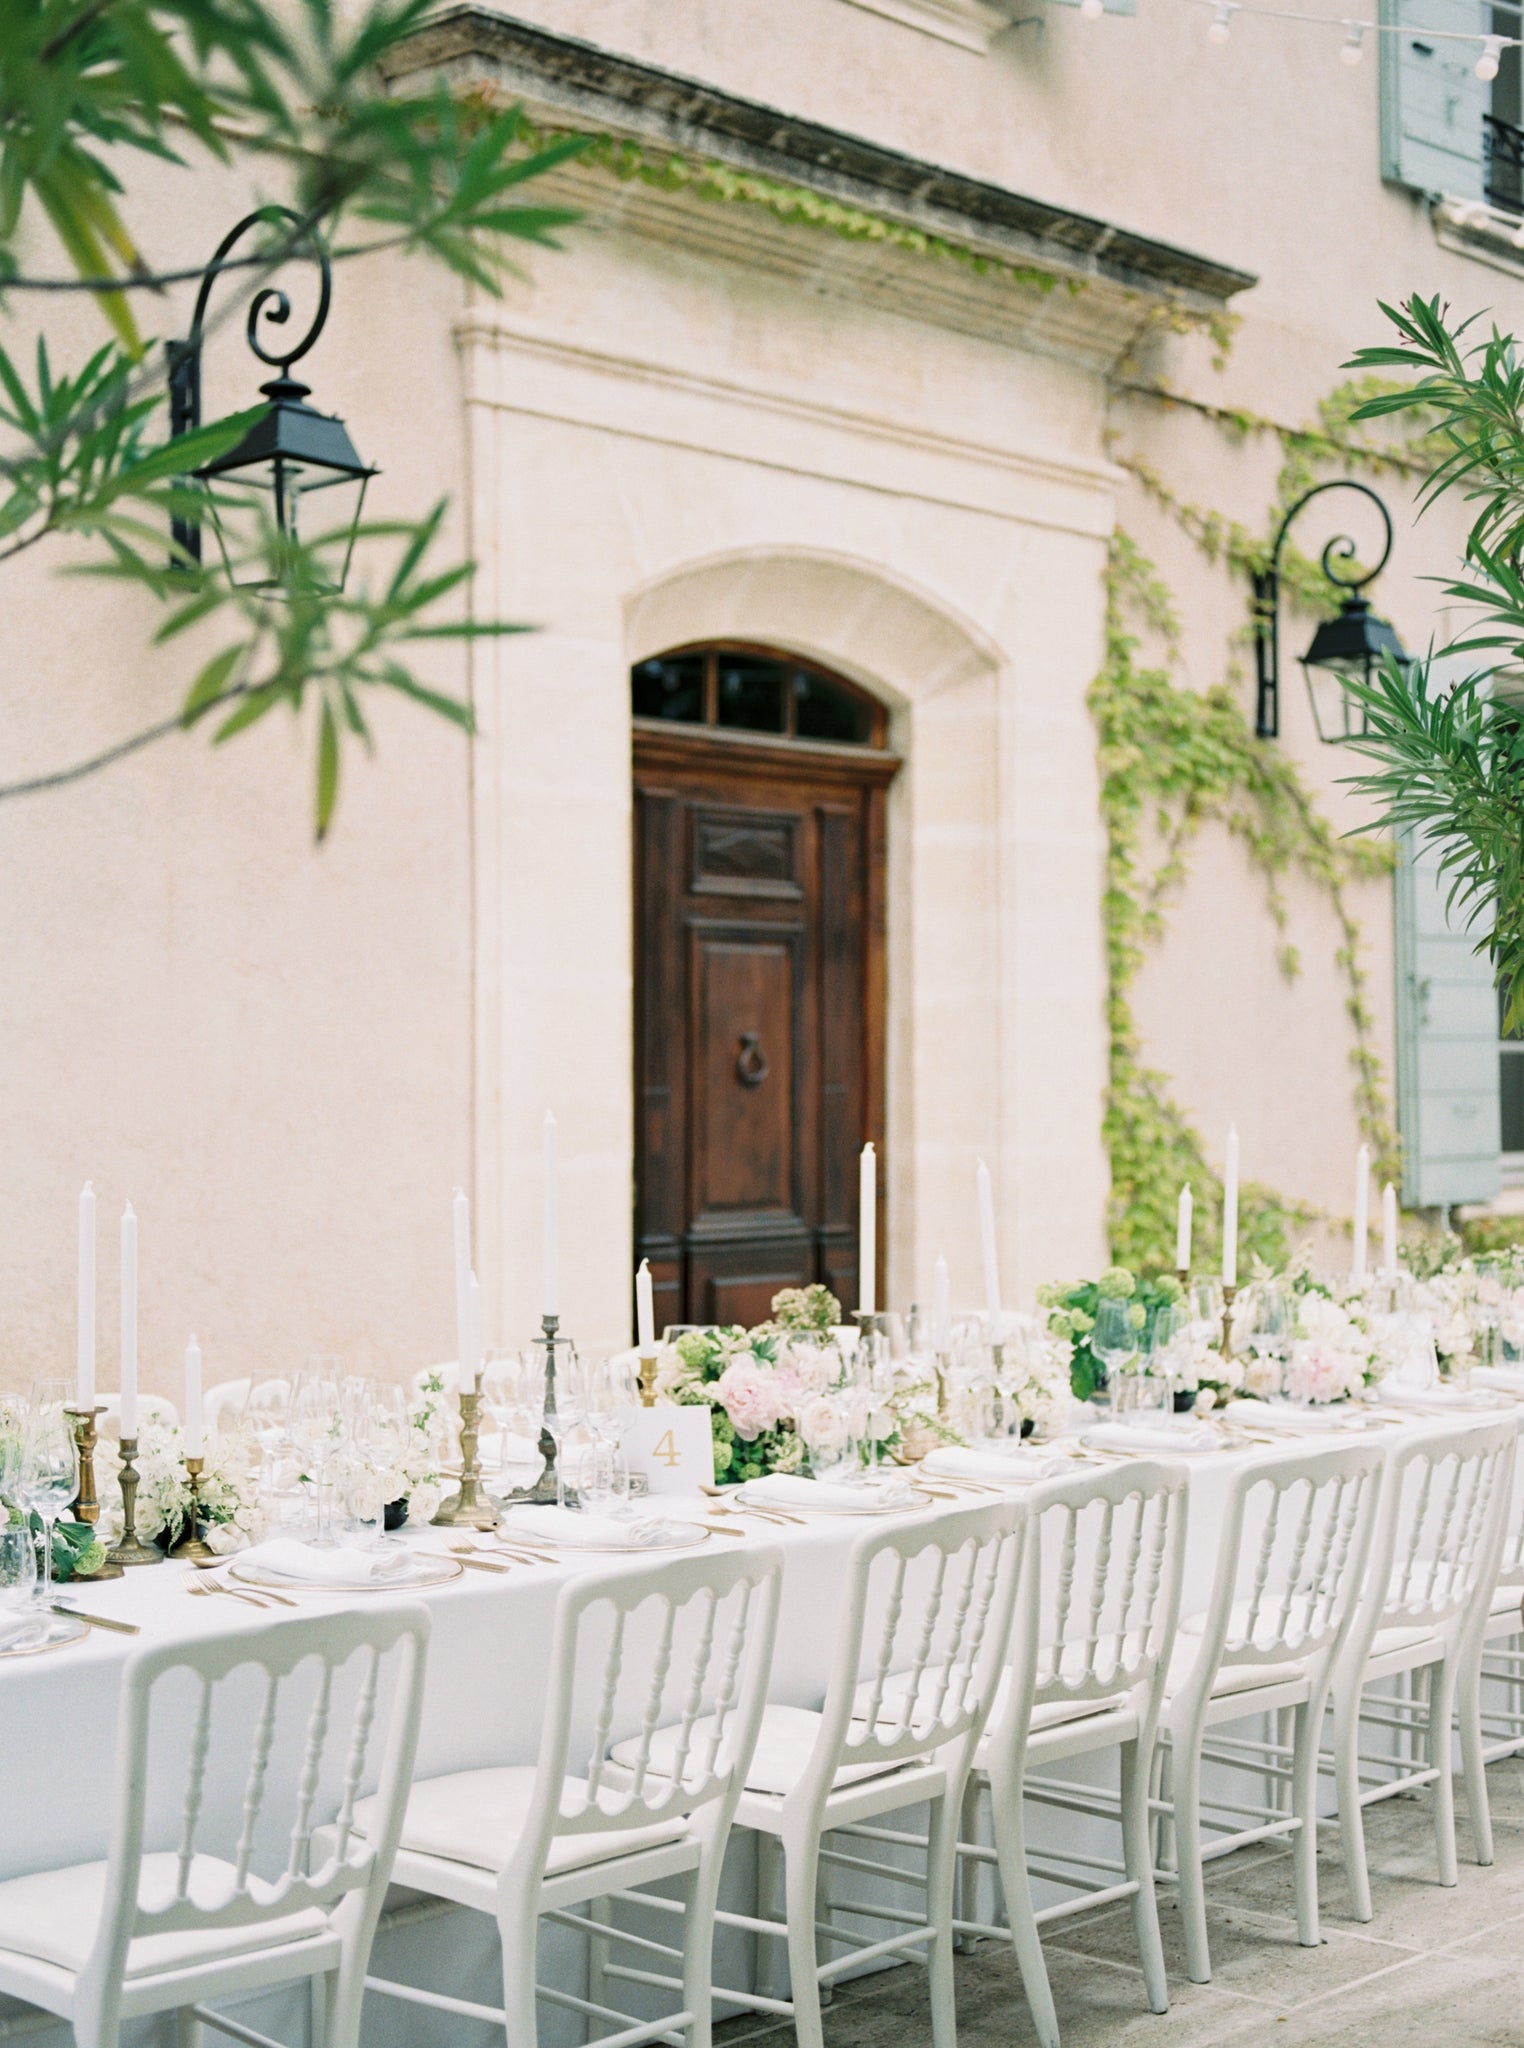 Katie Dean Jewelry romantic destination wedding at a chateau, Provence, France, wedding table